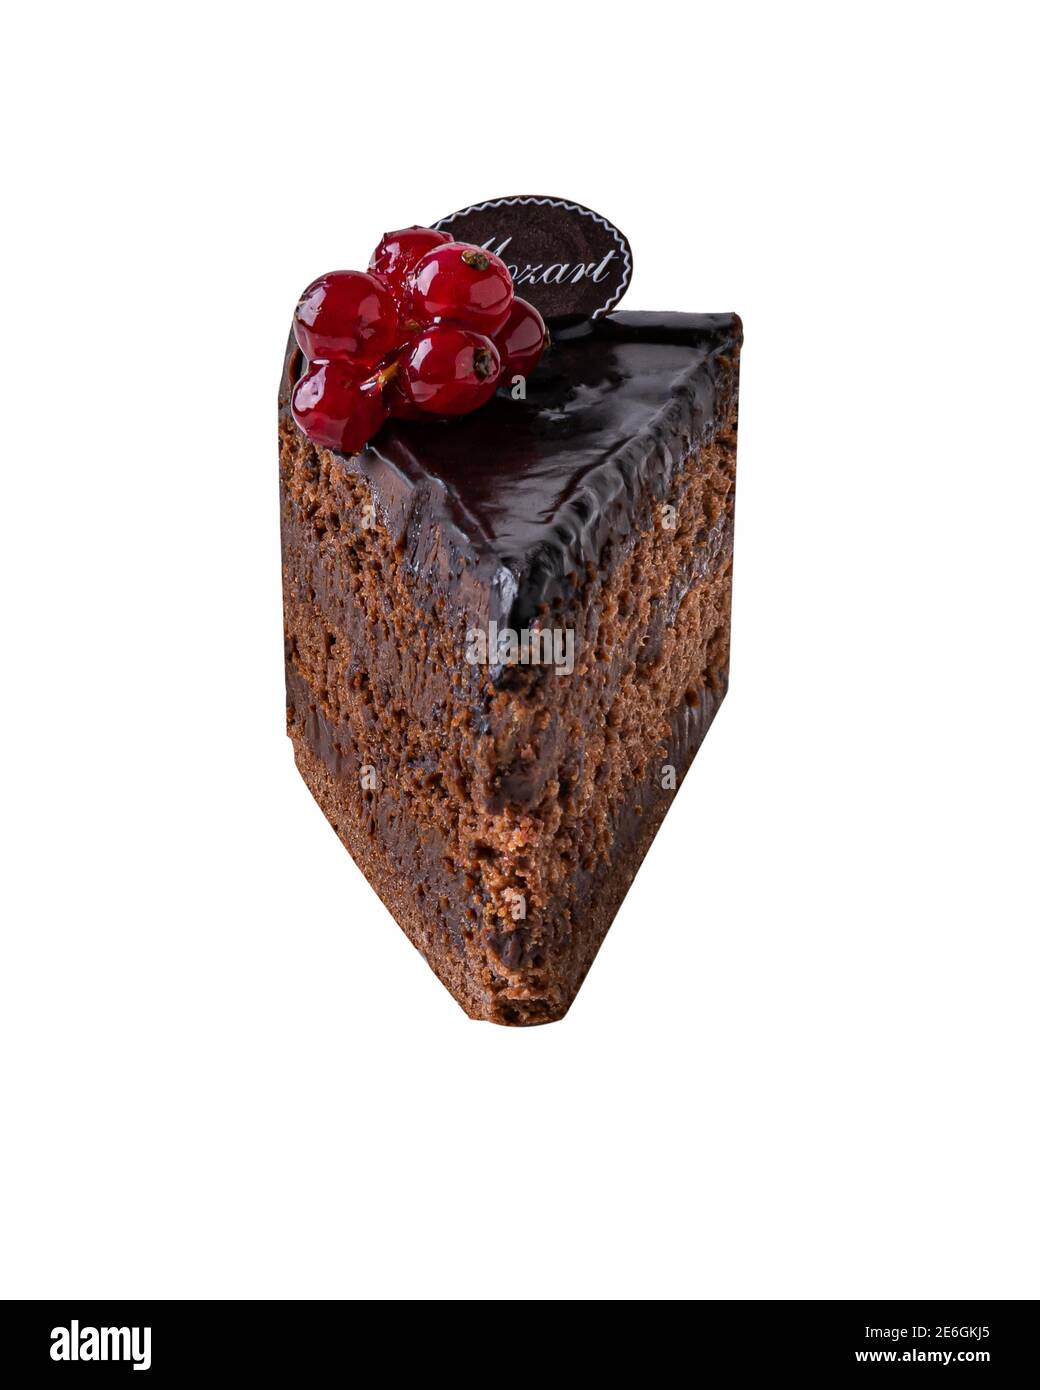 Piece of dark chocolate cake called Mozart decorated with glazed red currant berries. Piece of cake is isolated on white background without shadow. Stock Photo